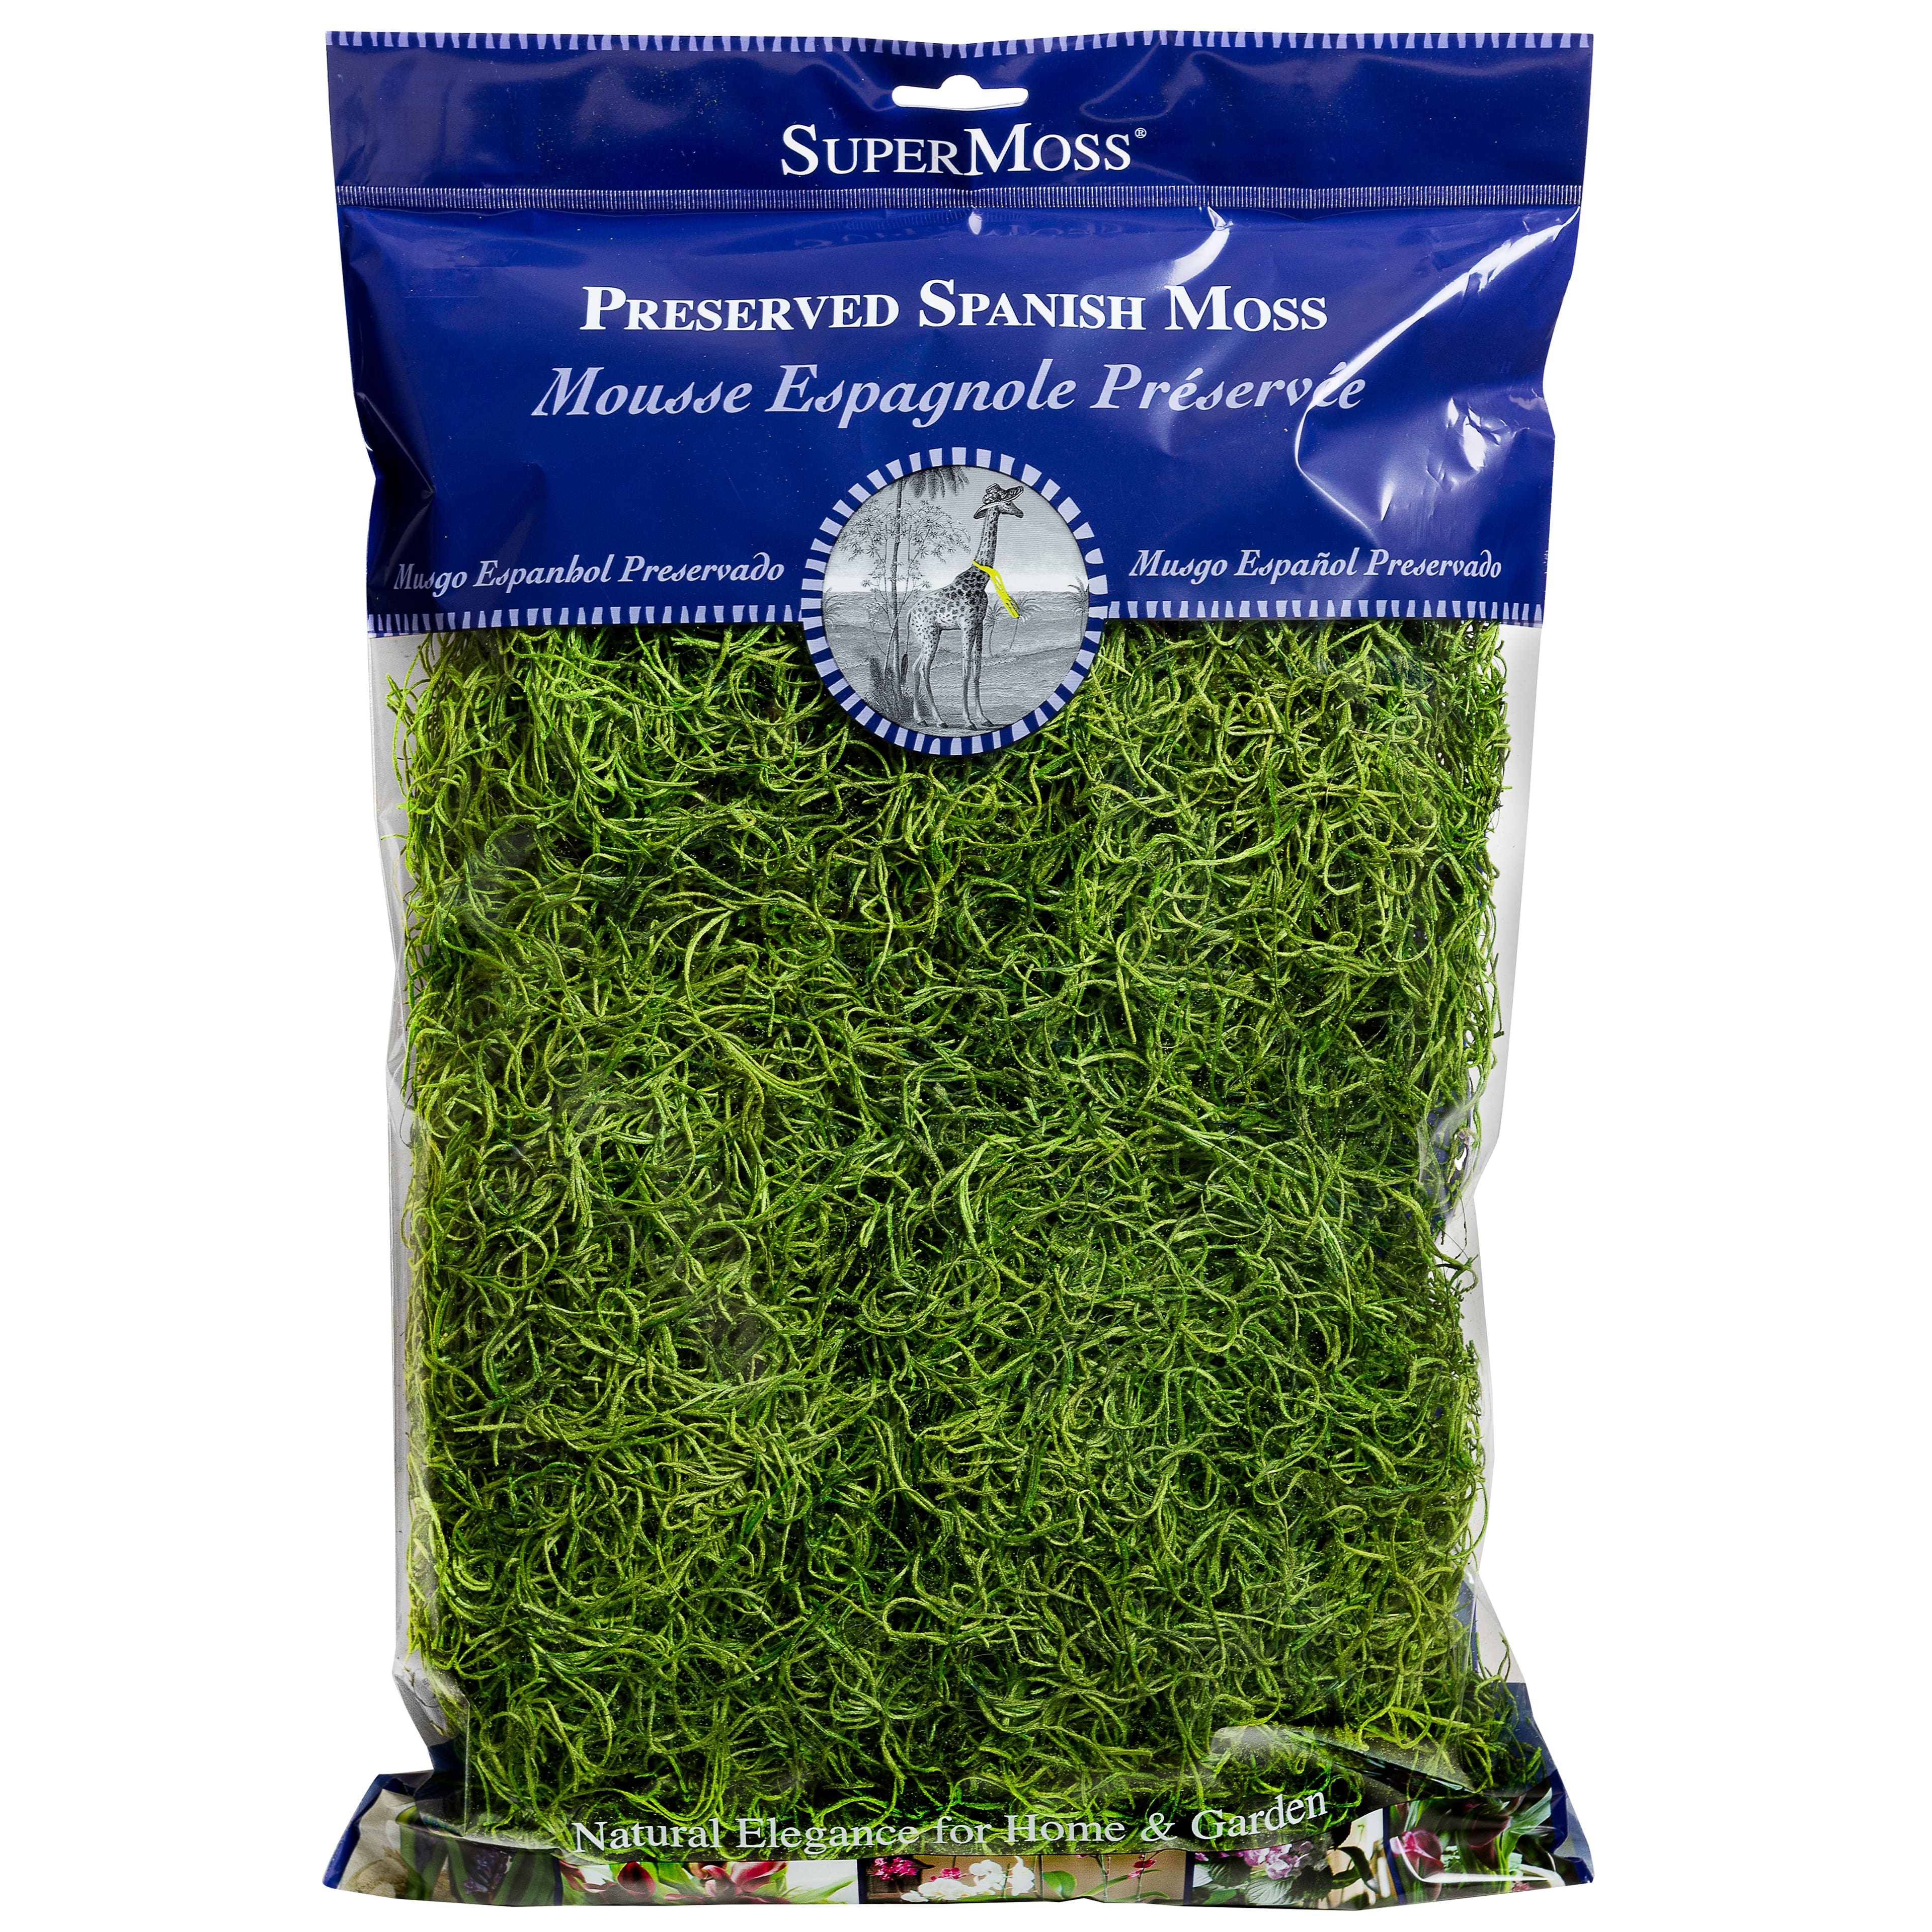 Super Moss 7 59834 8 26961 Spanish Moss Preserved, 120 in3 Bag (Appx. 4oz),  Violet